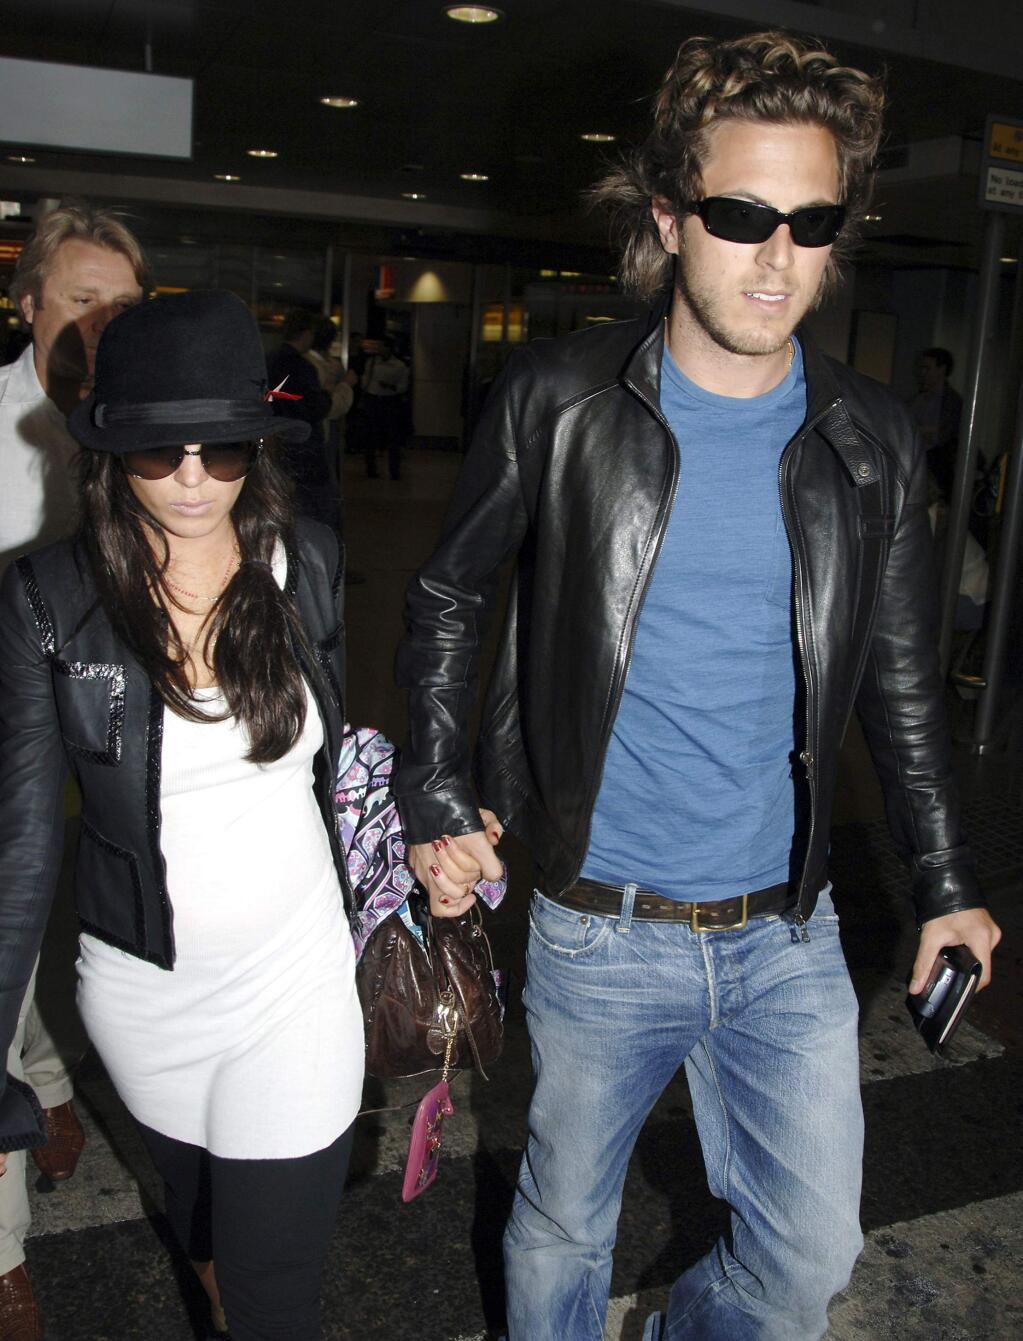 FILE - In this Thursday Sept. 7, 2006, file photo, Hollywood actress Lindsay Lohan, left, and boyfriend, Harry Morton arrive at London's Heathrow Airport from Venice, Italy. Harry Morton, a restaurant mogul who is the son of the Hard Rock Cafe chain co-founder and grandson of the Morton's The Steakhouse founder, has died. Pink Taco, a restaurant business Morton founded and previously owned, confirmed his death in a statement Sunday, Nov. 24, 2019. He was 38. (AP Photo/File)